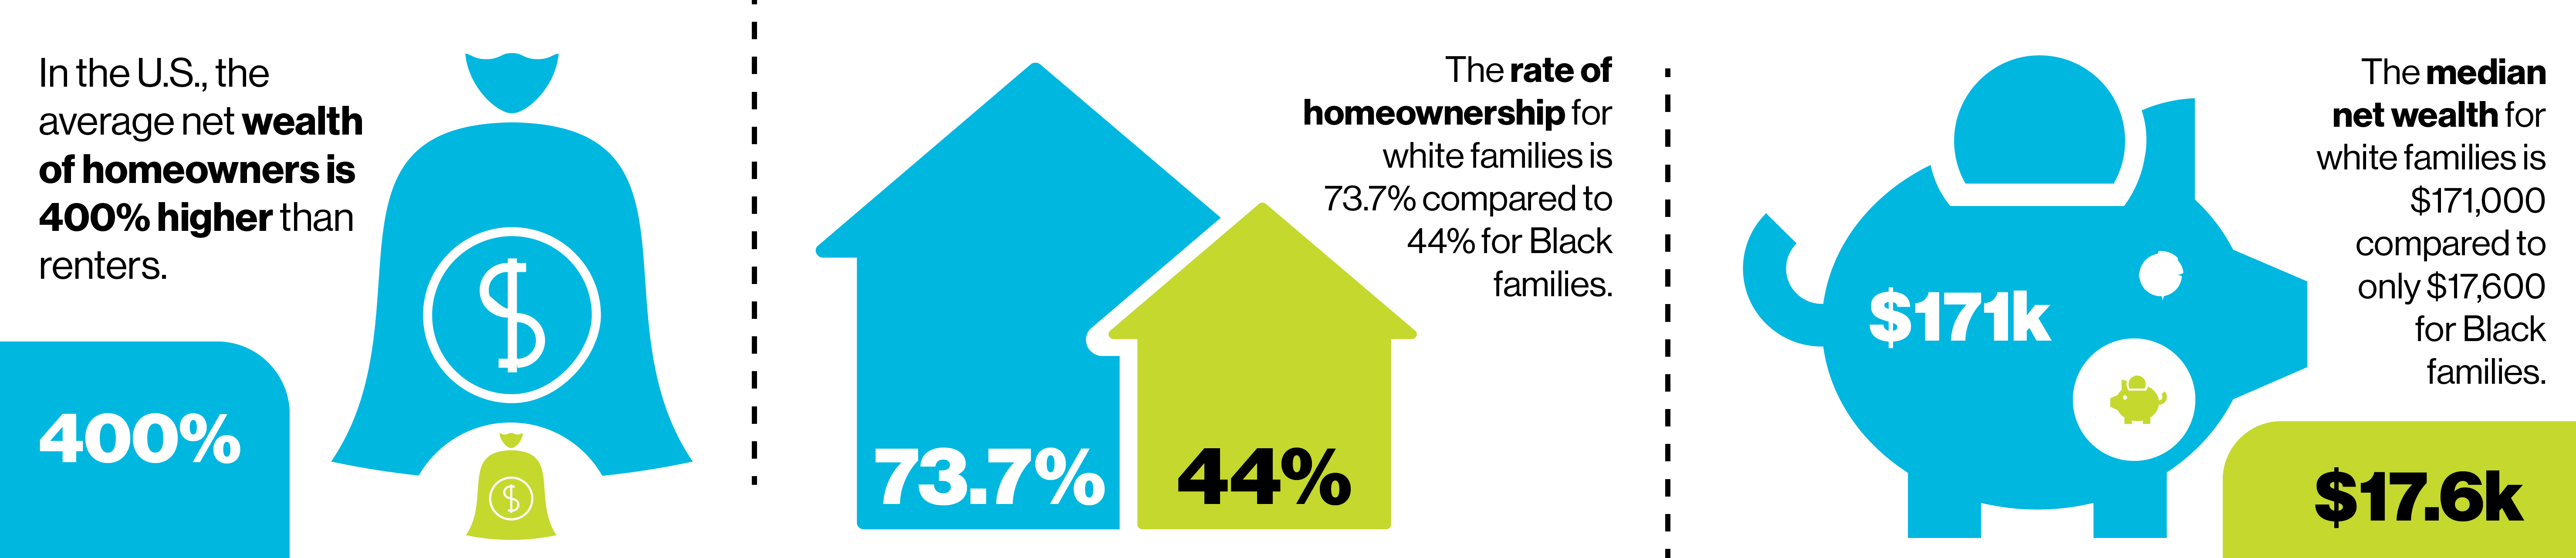 Homeownership by race graphic 